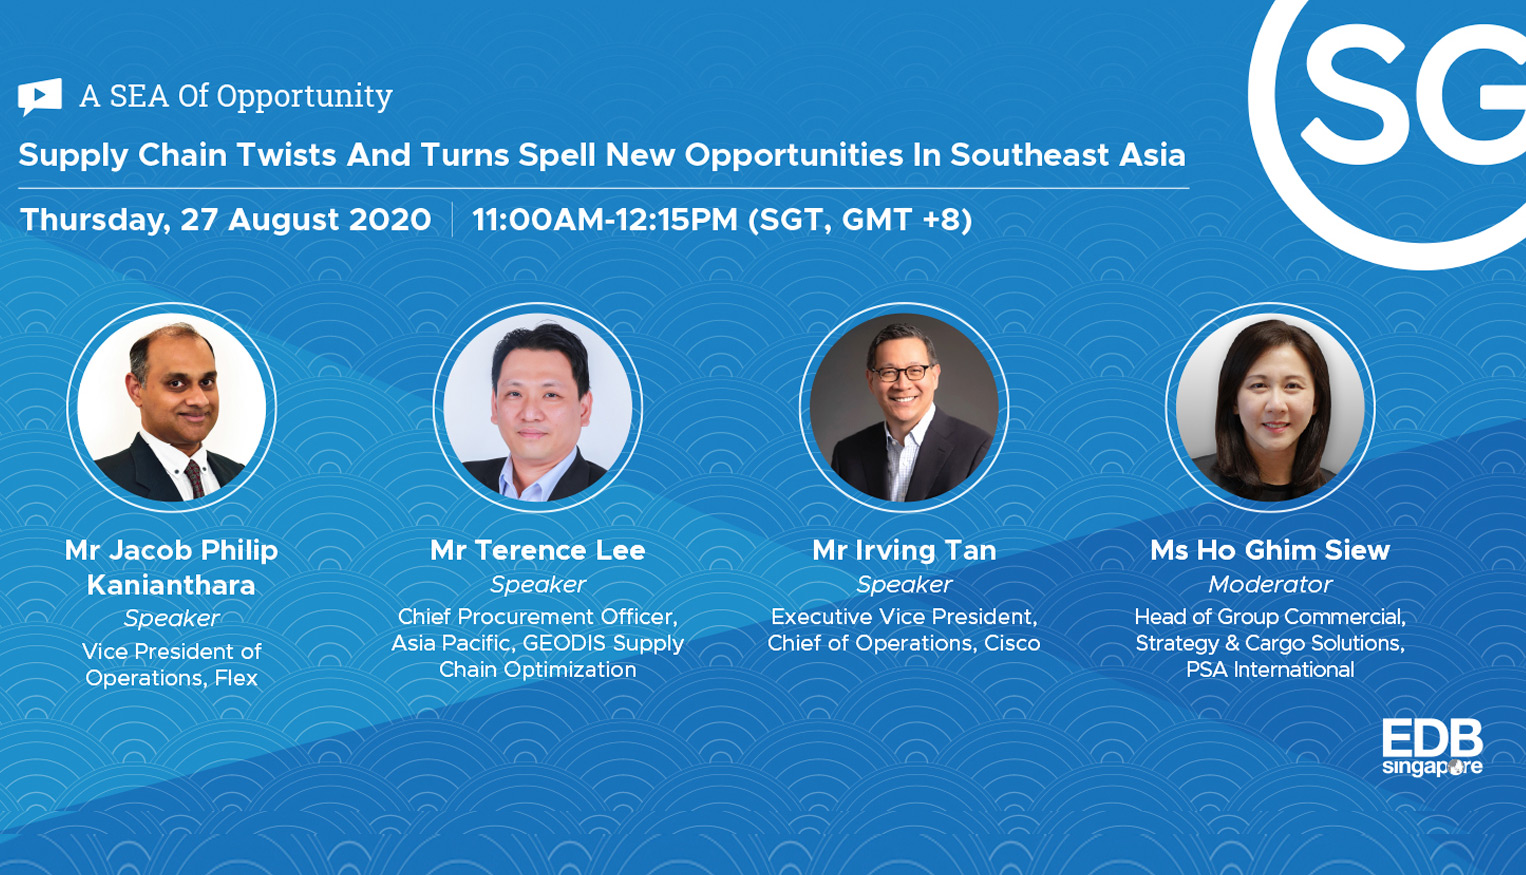 Supply Chain Twists And Turns Spell New Opportunities In Southeast Asia